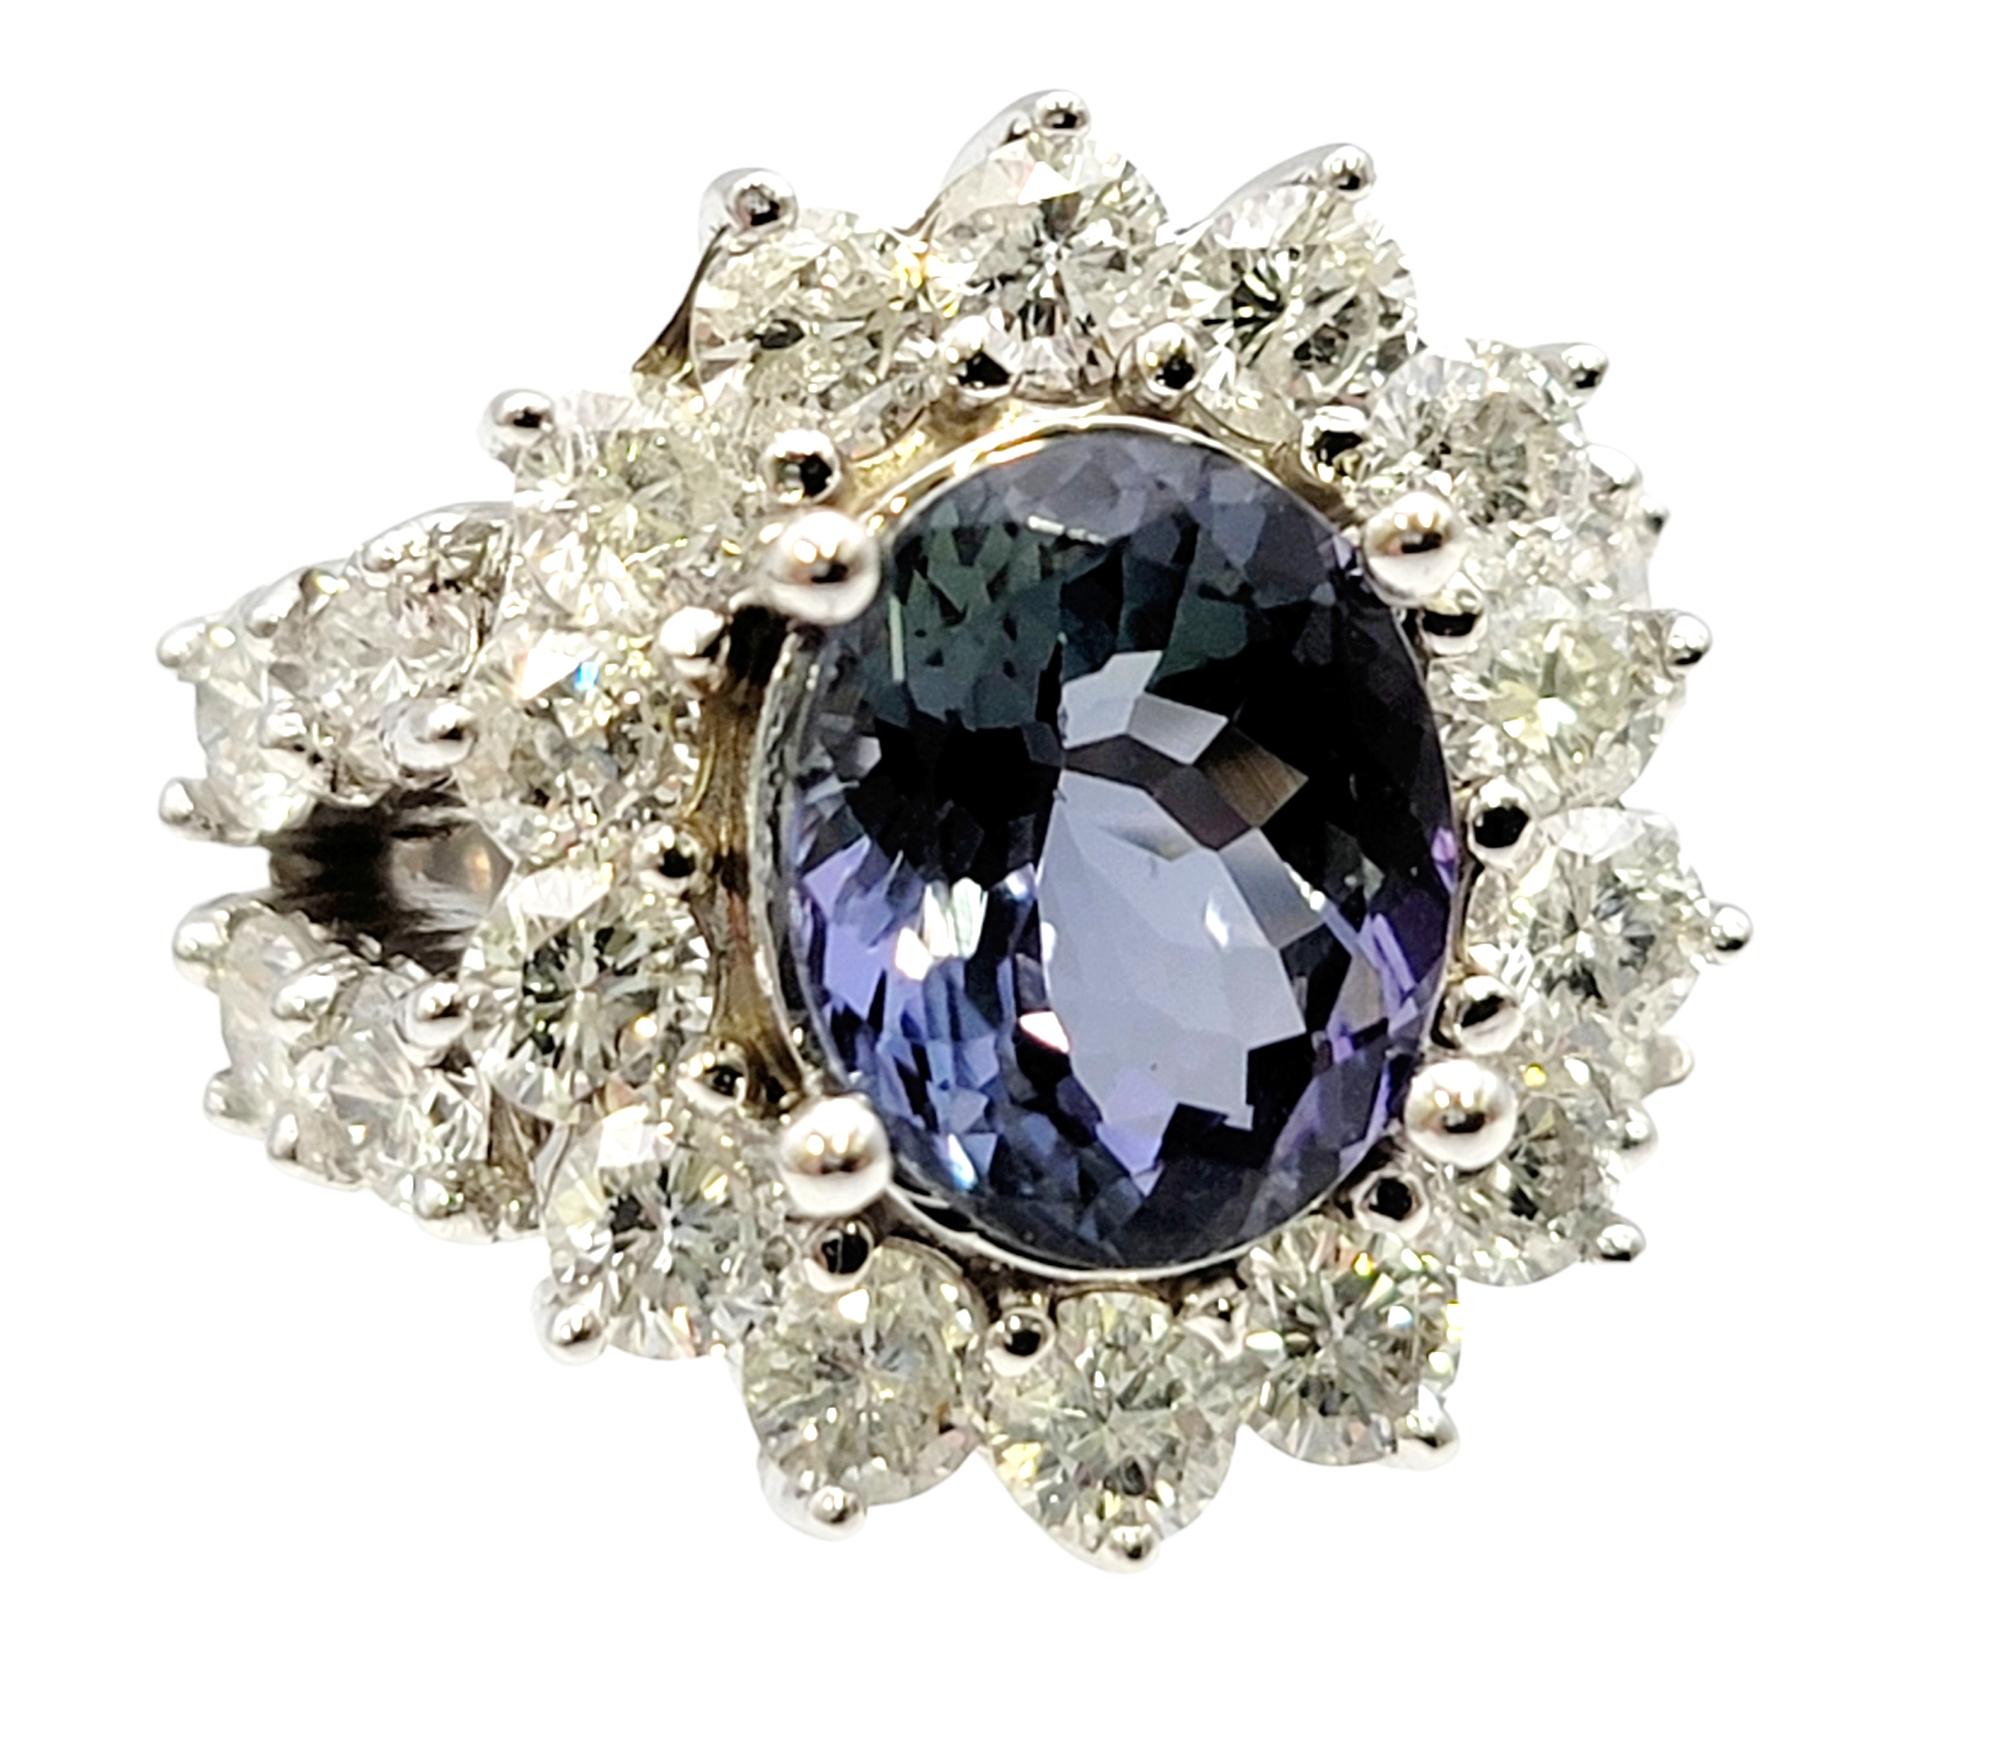 Ring size: 5.25

You will absolutely adore this strikingly sparkly zoisite and diamond halo ring. Bursting with sparkle, the unique greenish-blue oval cut zoisite stone really pops against the icy white diamonds and polished 14 karat white gold